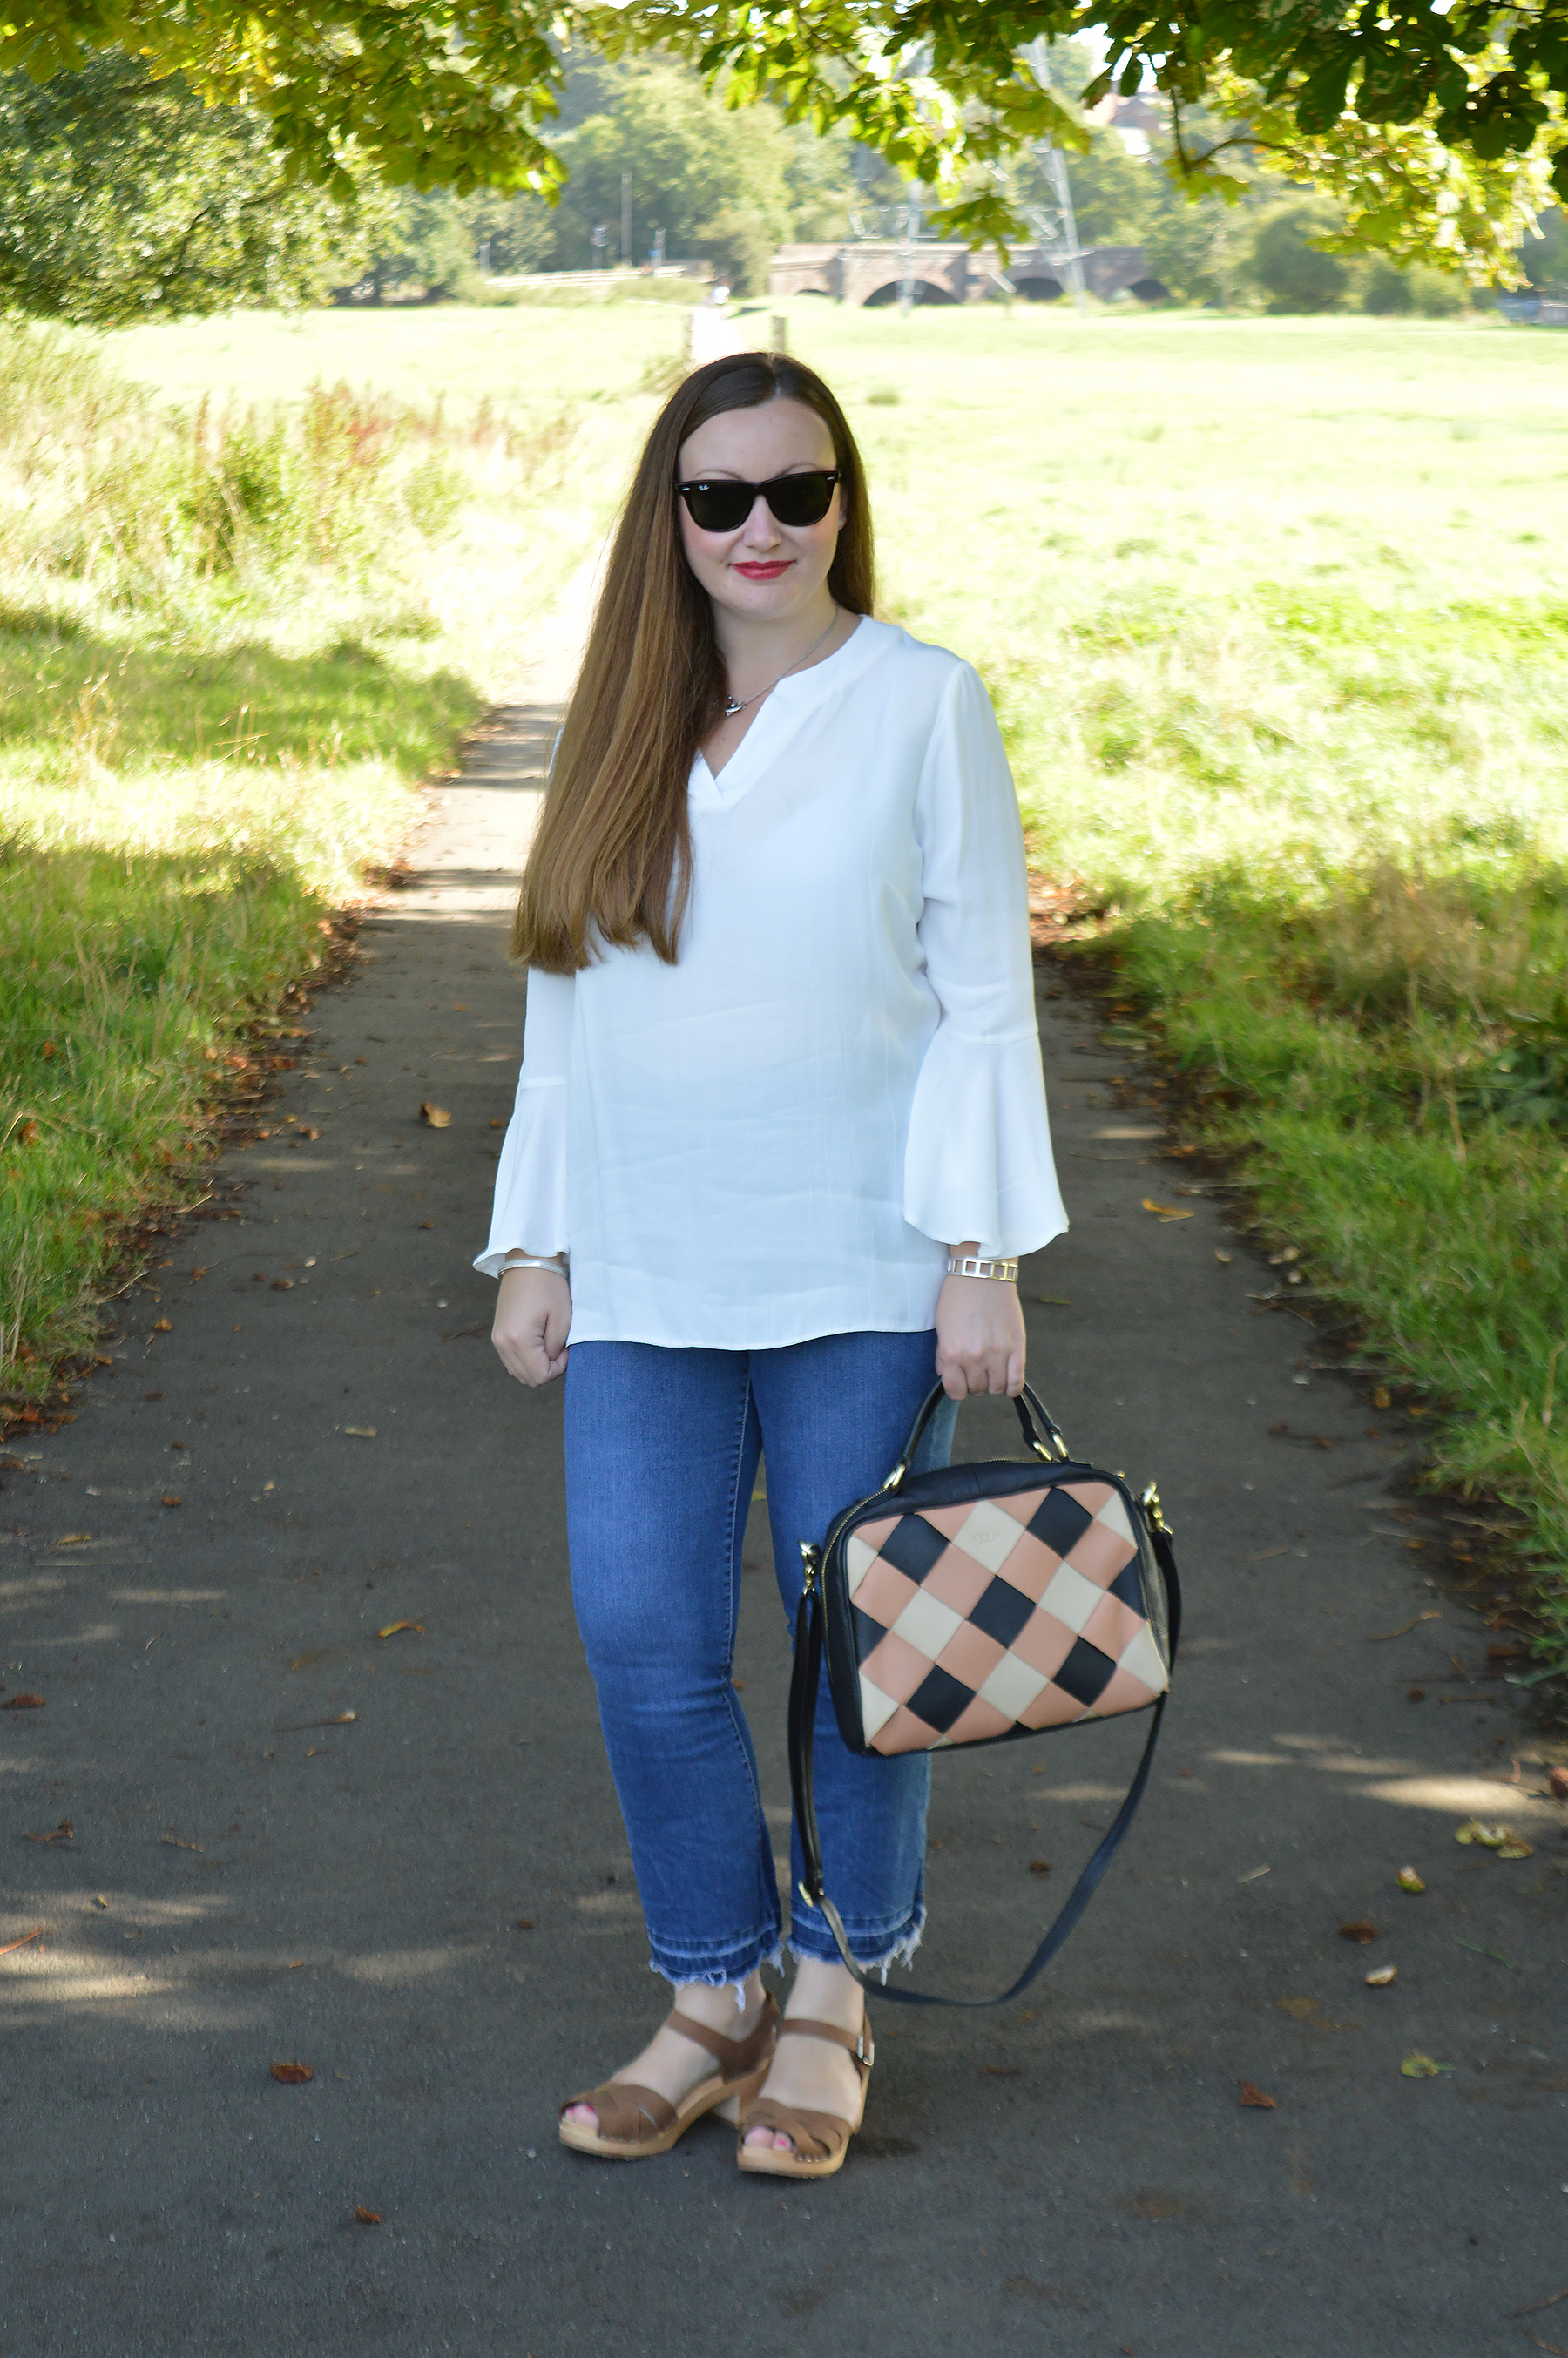 Ruffle sleeve trend and clogs 